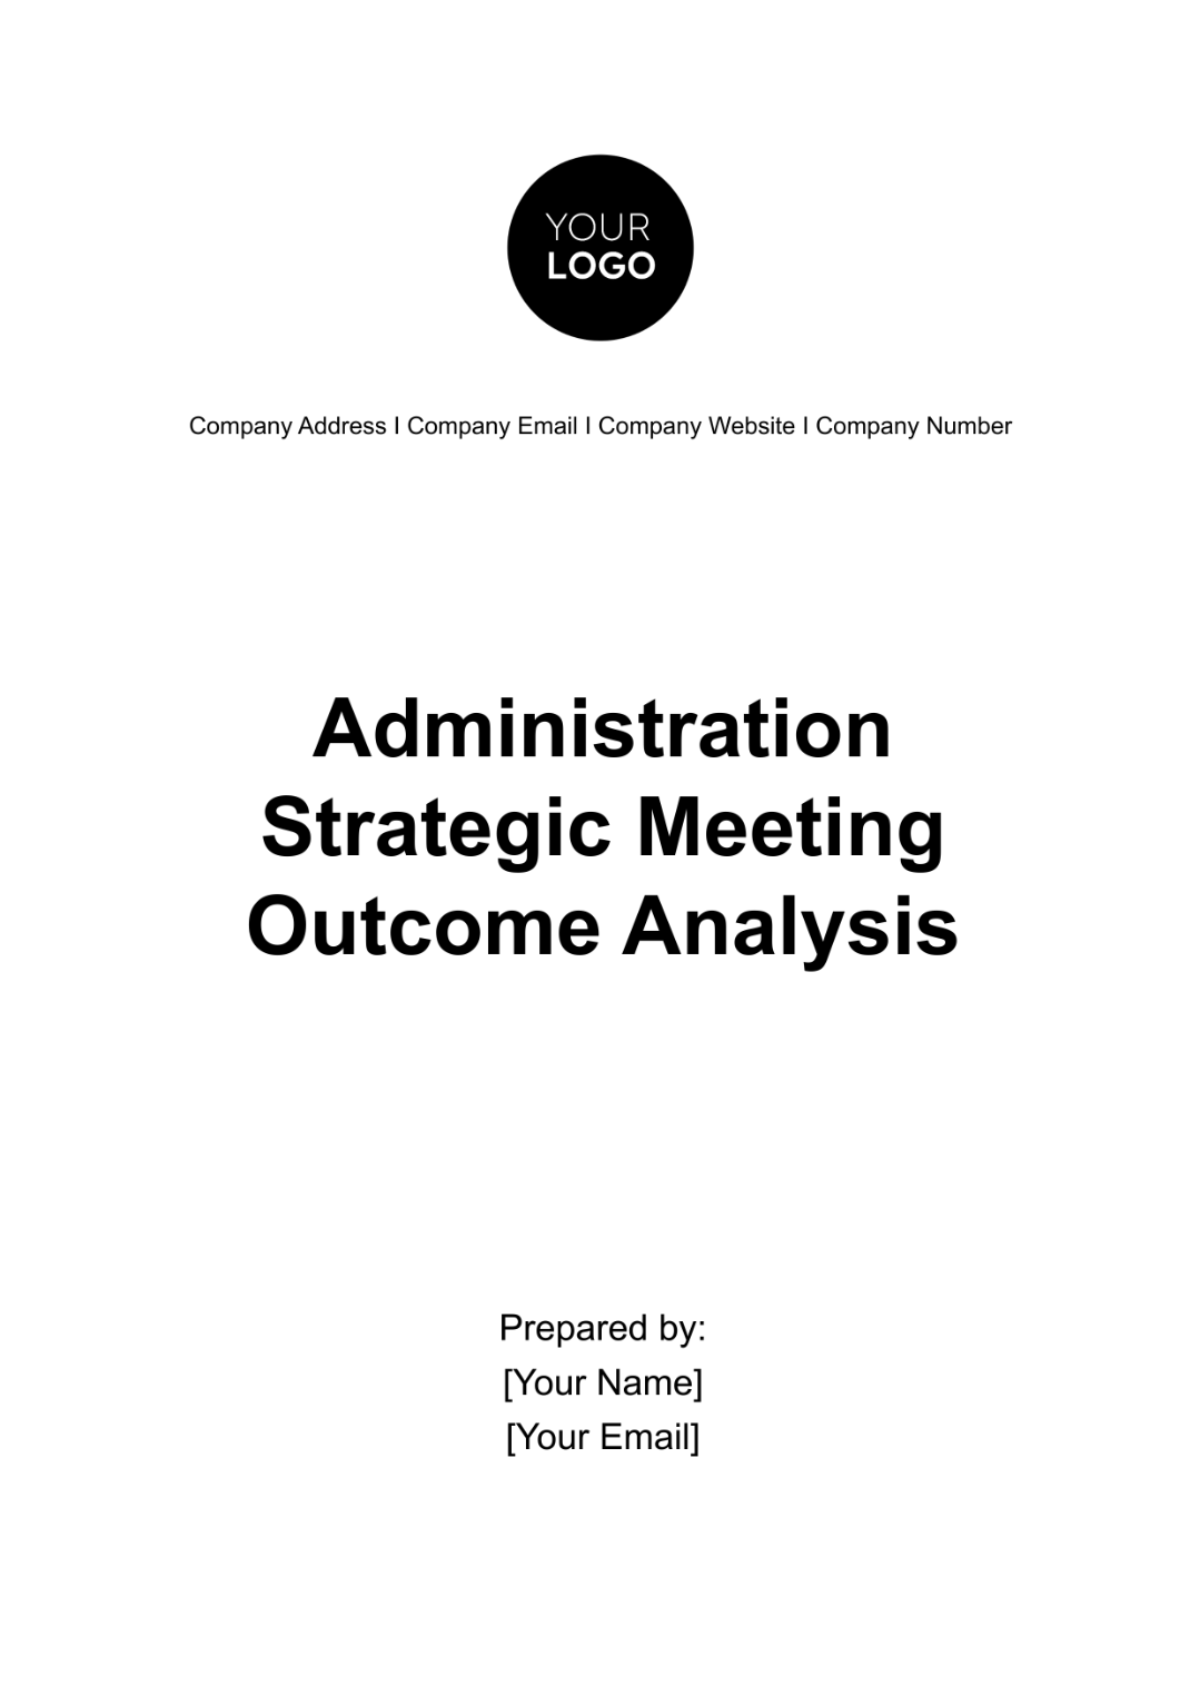 Administration Strategic Meeting Outcome Analysis Template